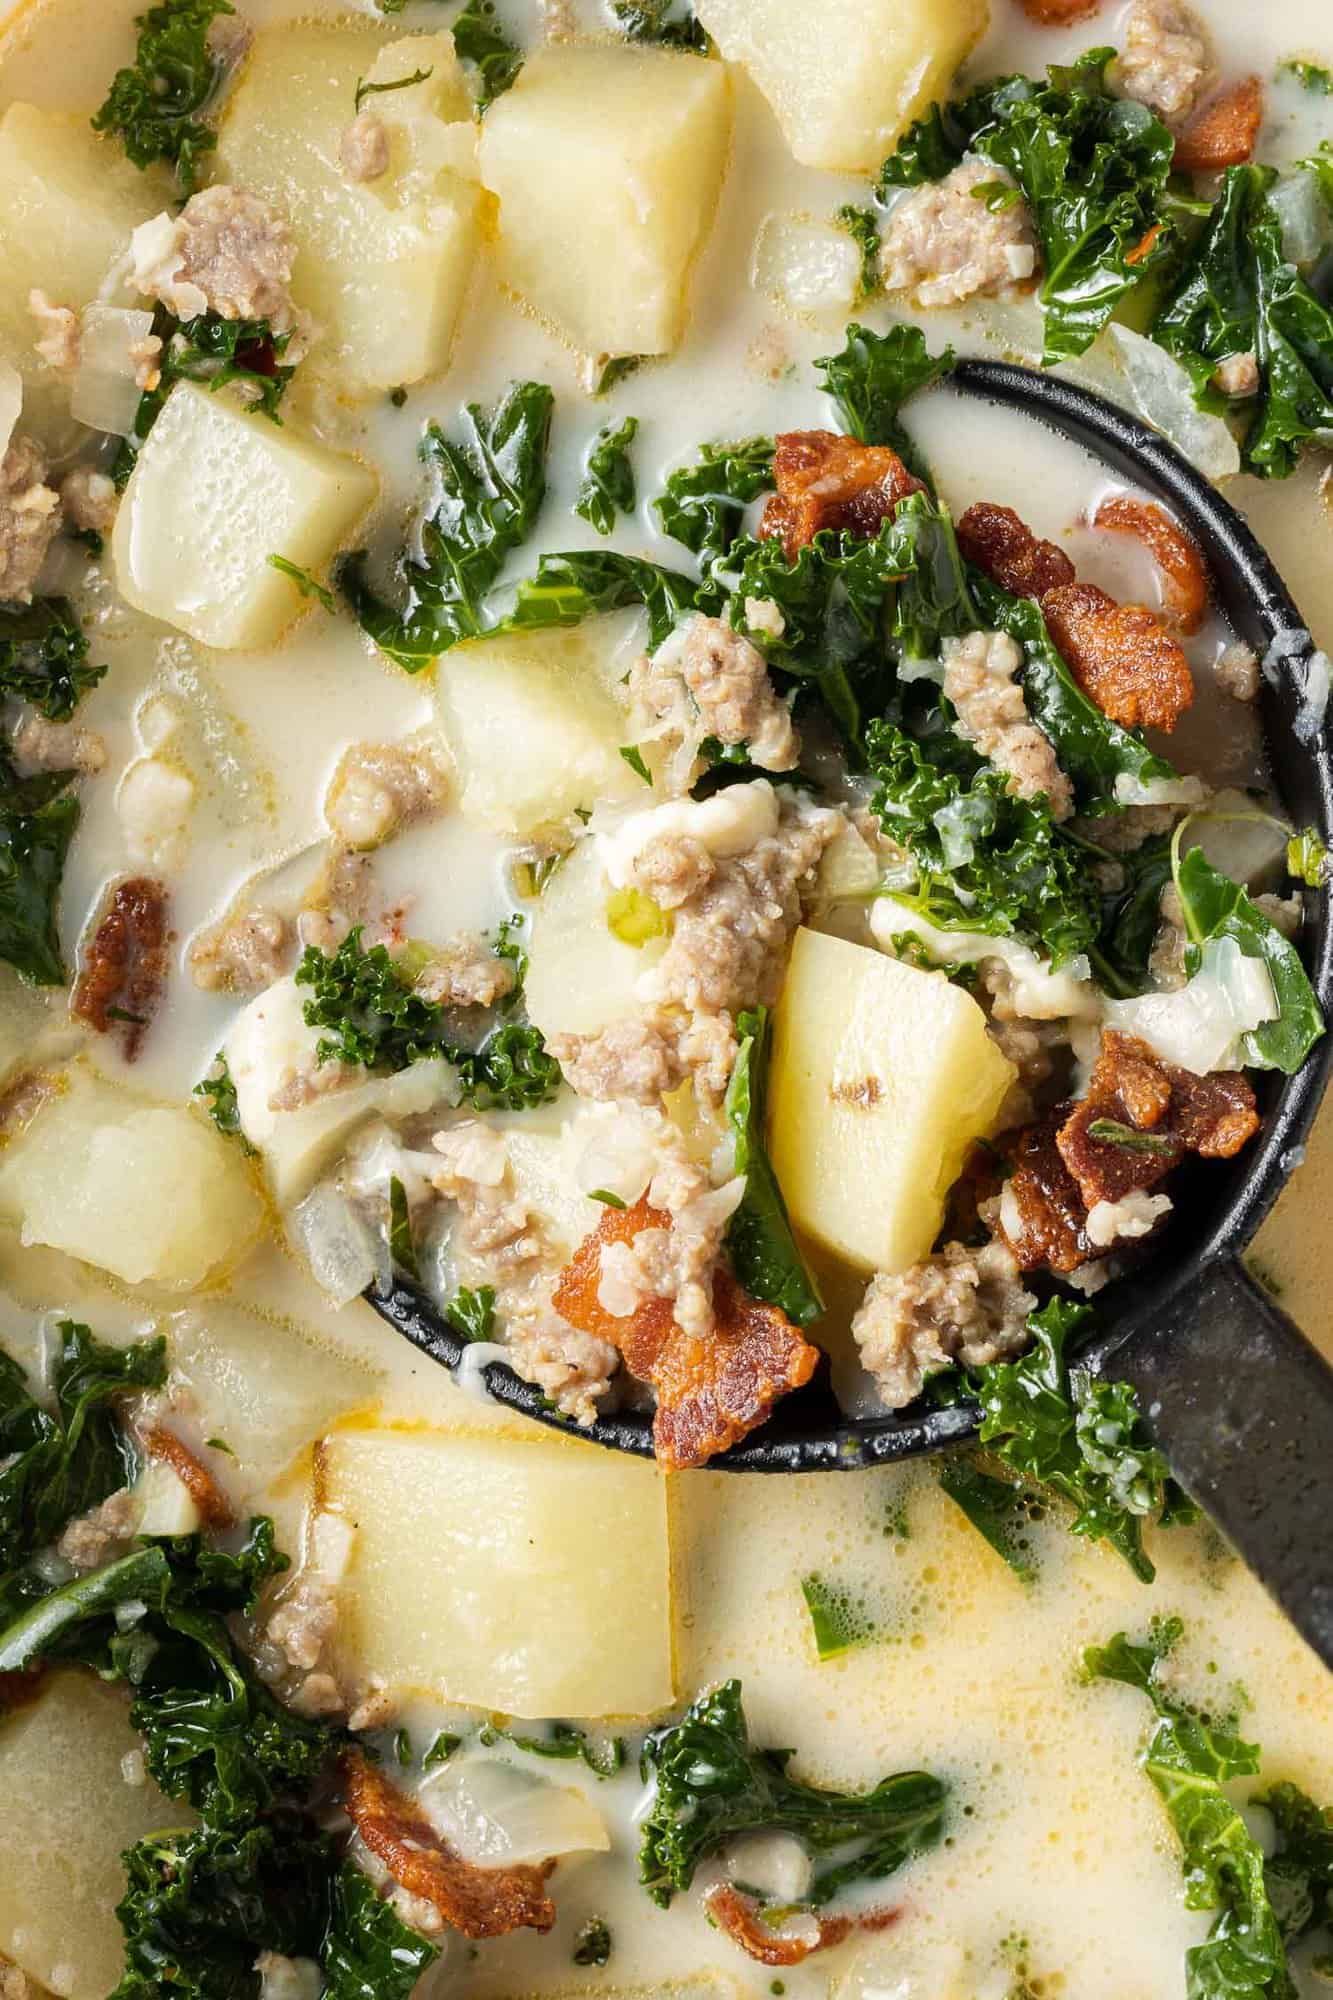 Creamy soup with kale, sausage, and potatoes shown in a ladle.